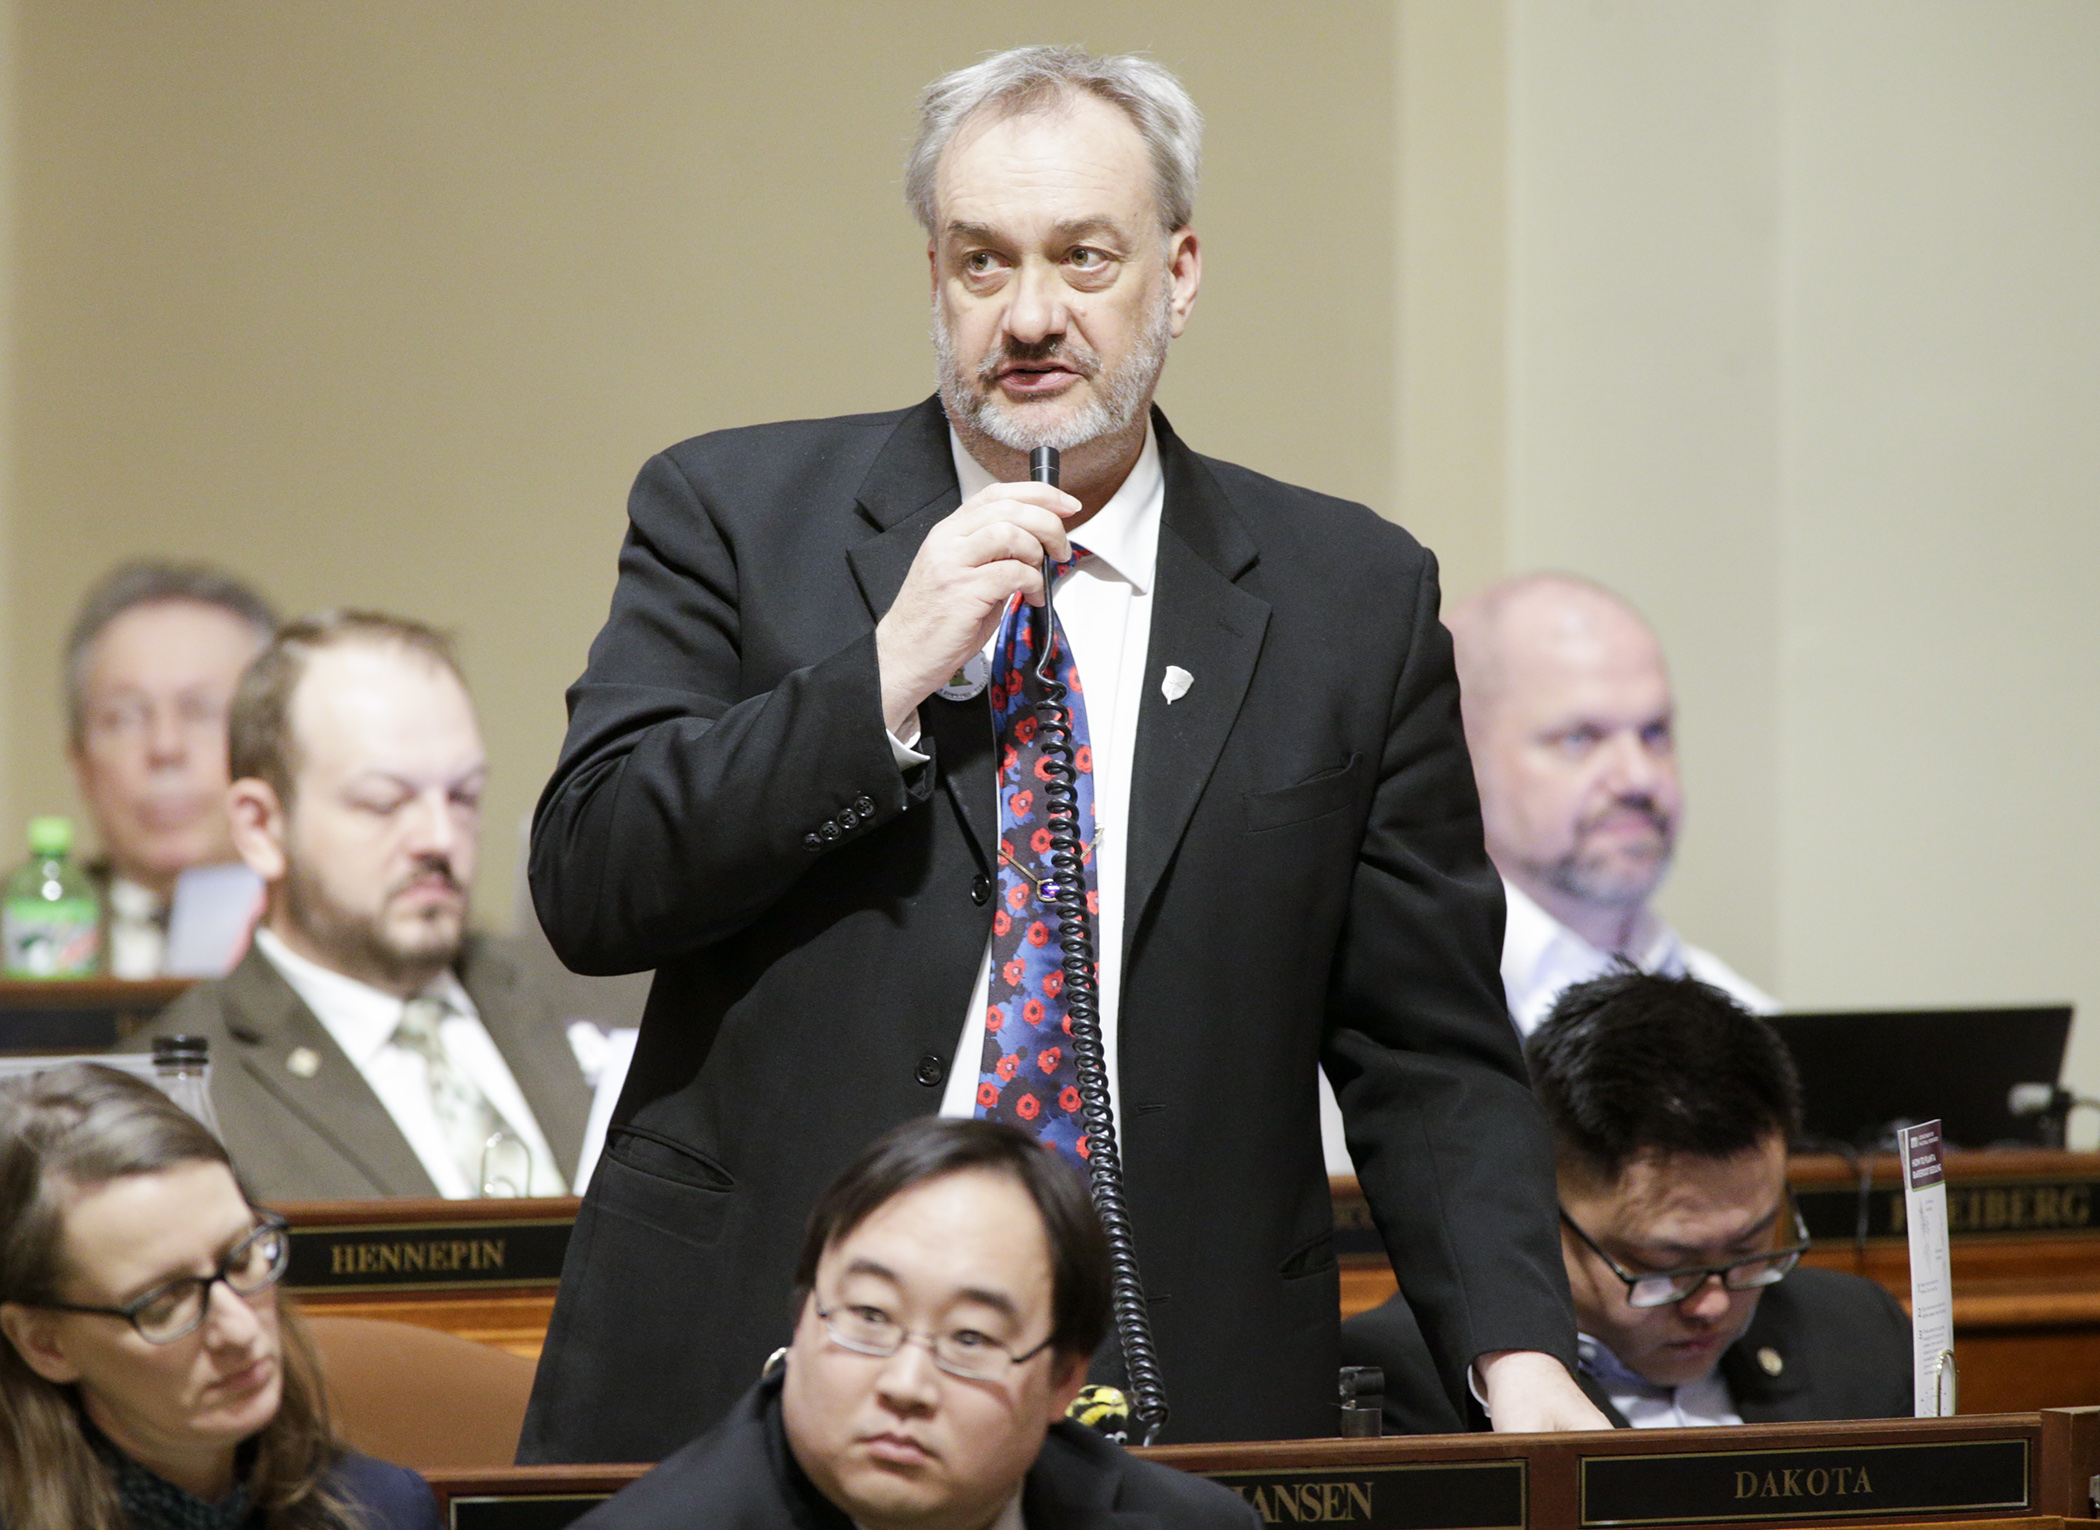 Rep. Rick Hansen, chair of the House Environment and Natural Resources Finance Division, comments during floor debate of HF2032, which appropriates funds from the Environment and Natural Resources Trust Fund. Photo by Paul Battaglia